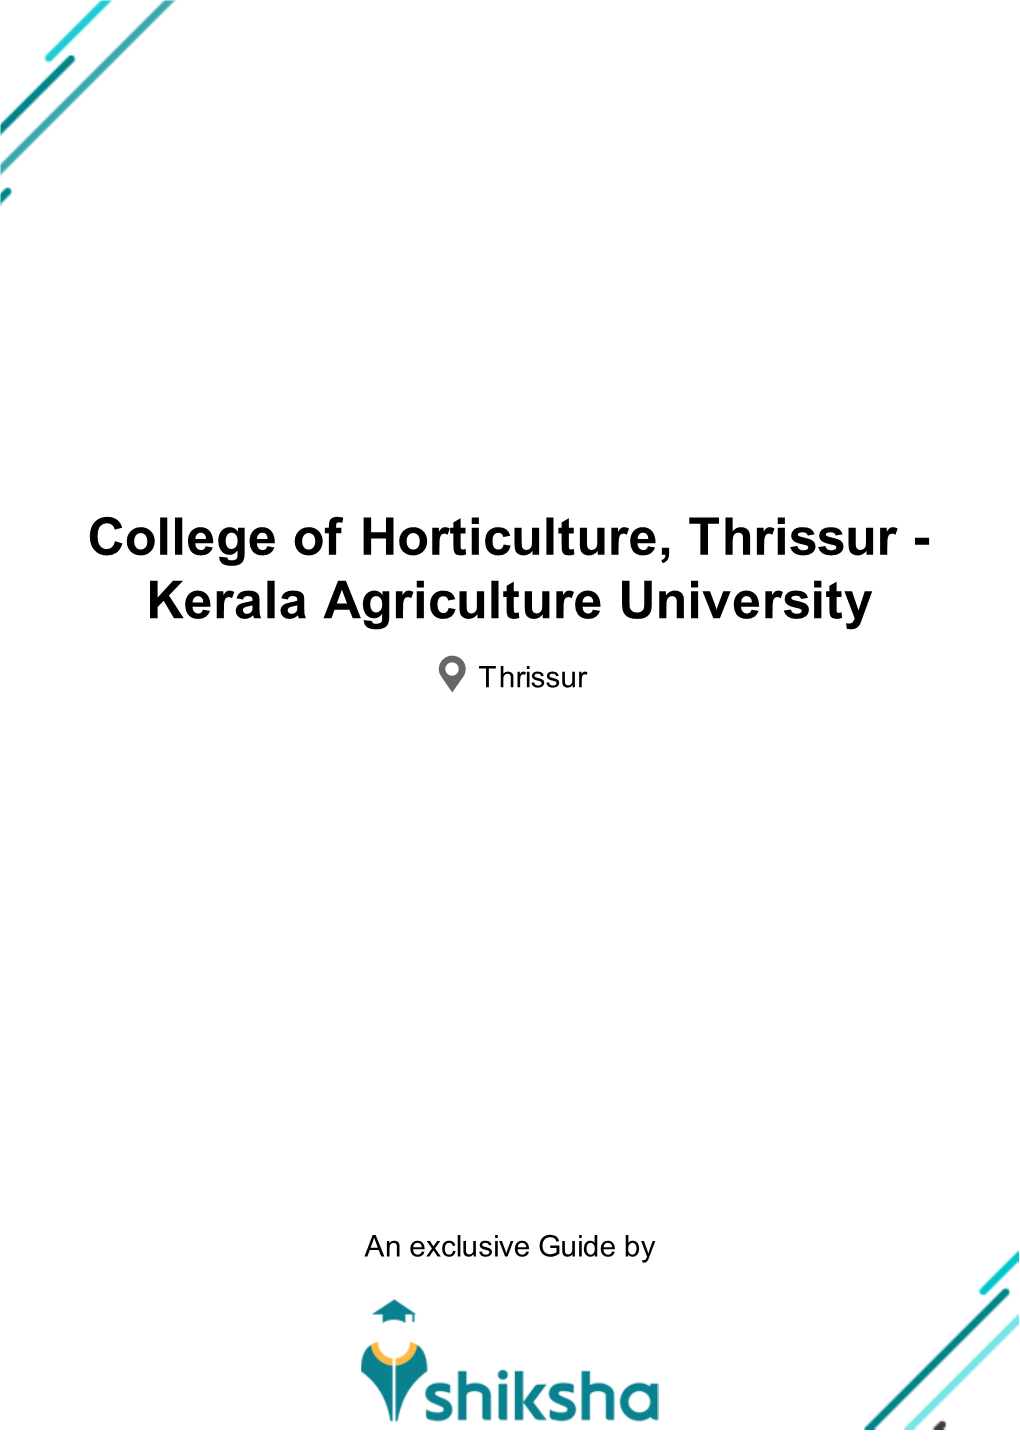 College of Horticulture, Thrissur - Kerala Agriculture University